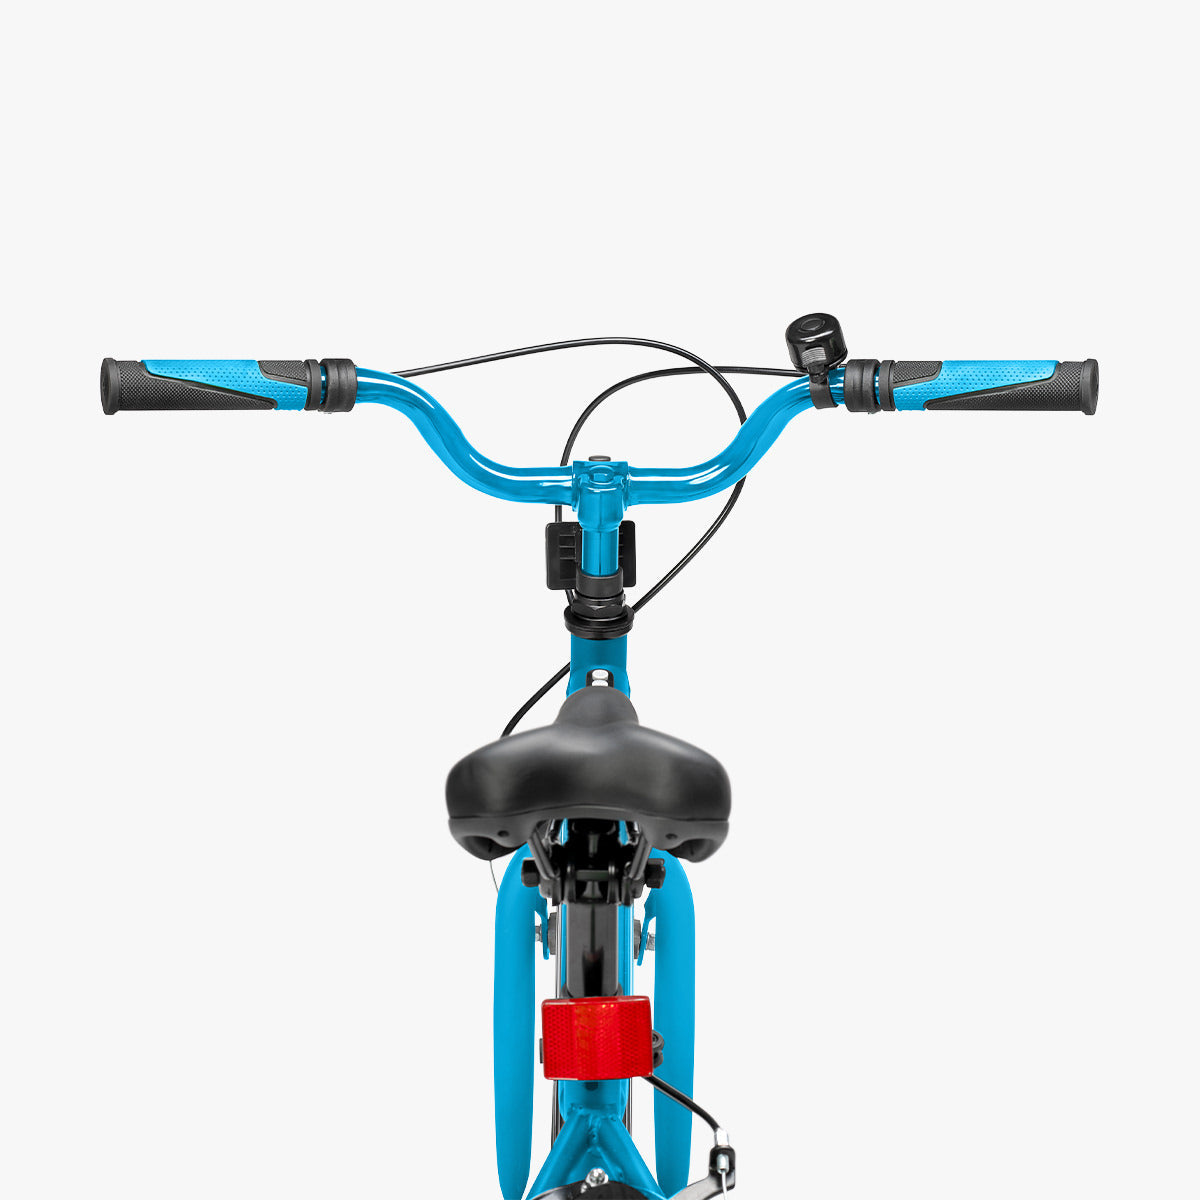 back view of the blue JLR X bike with the handlebars visible 